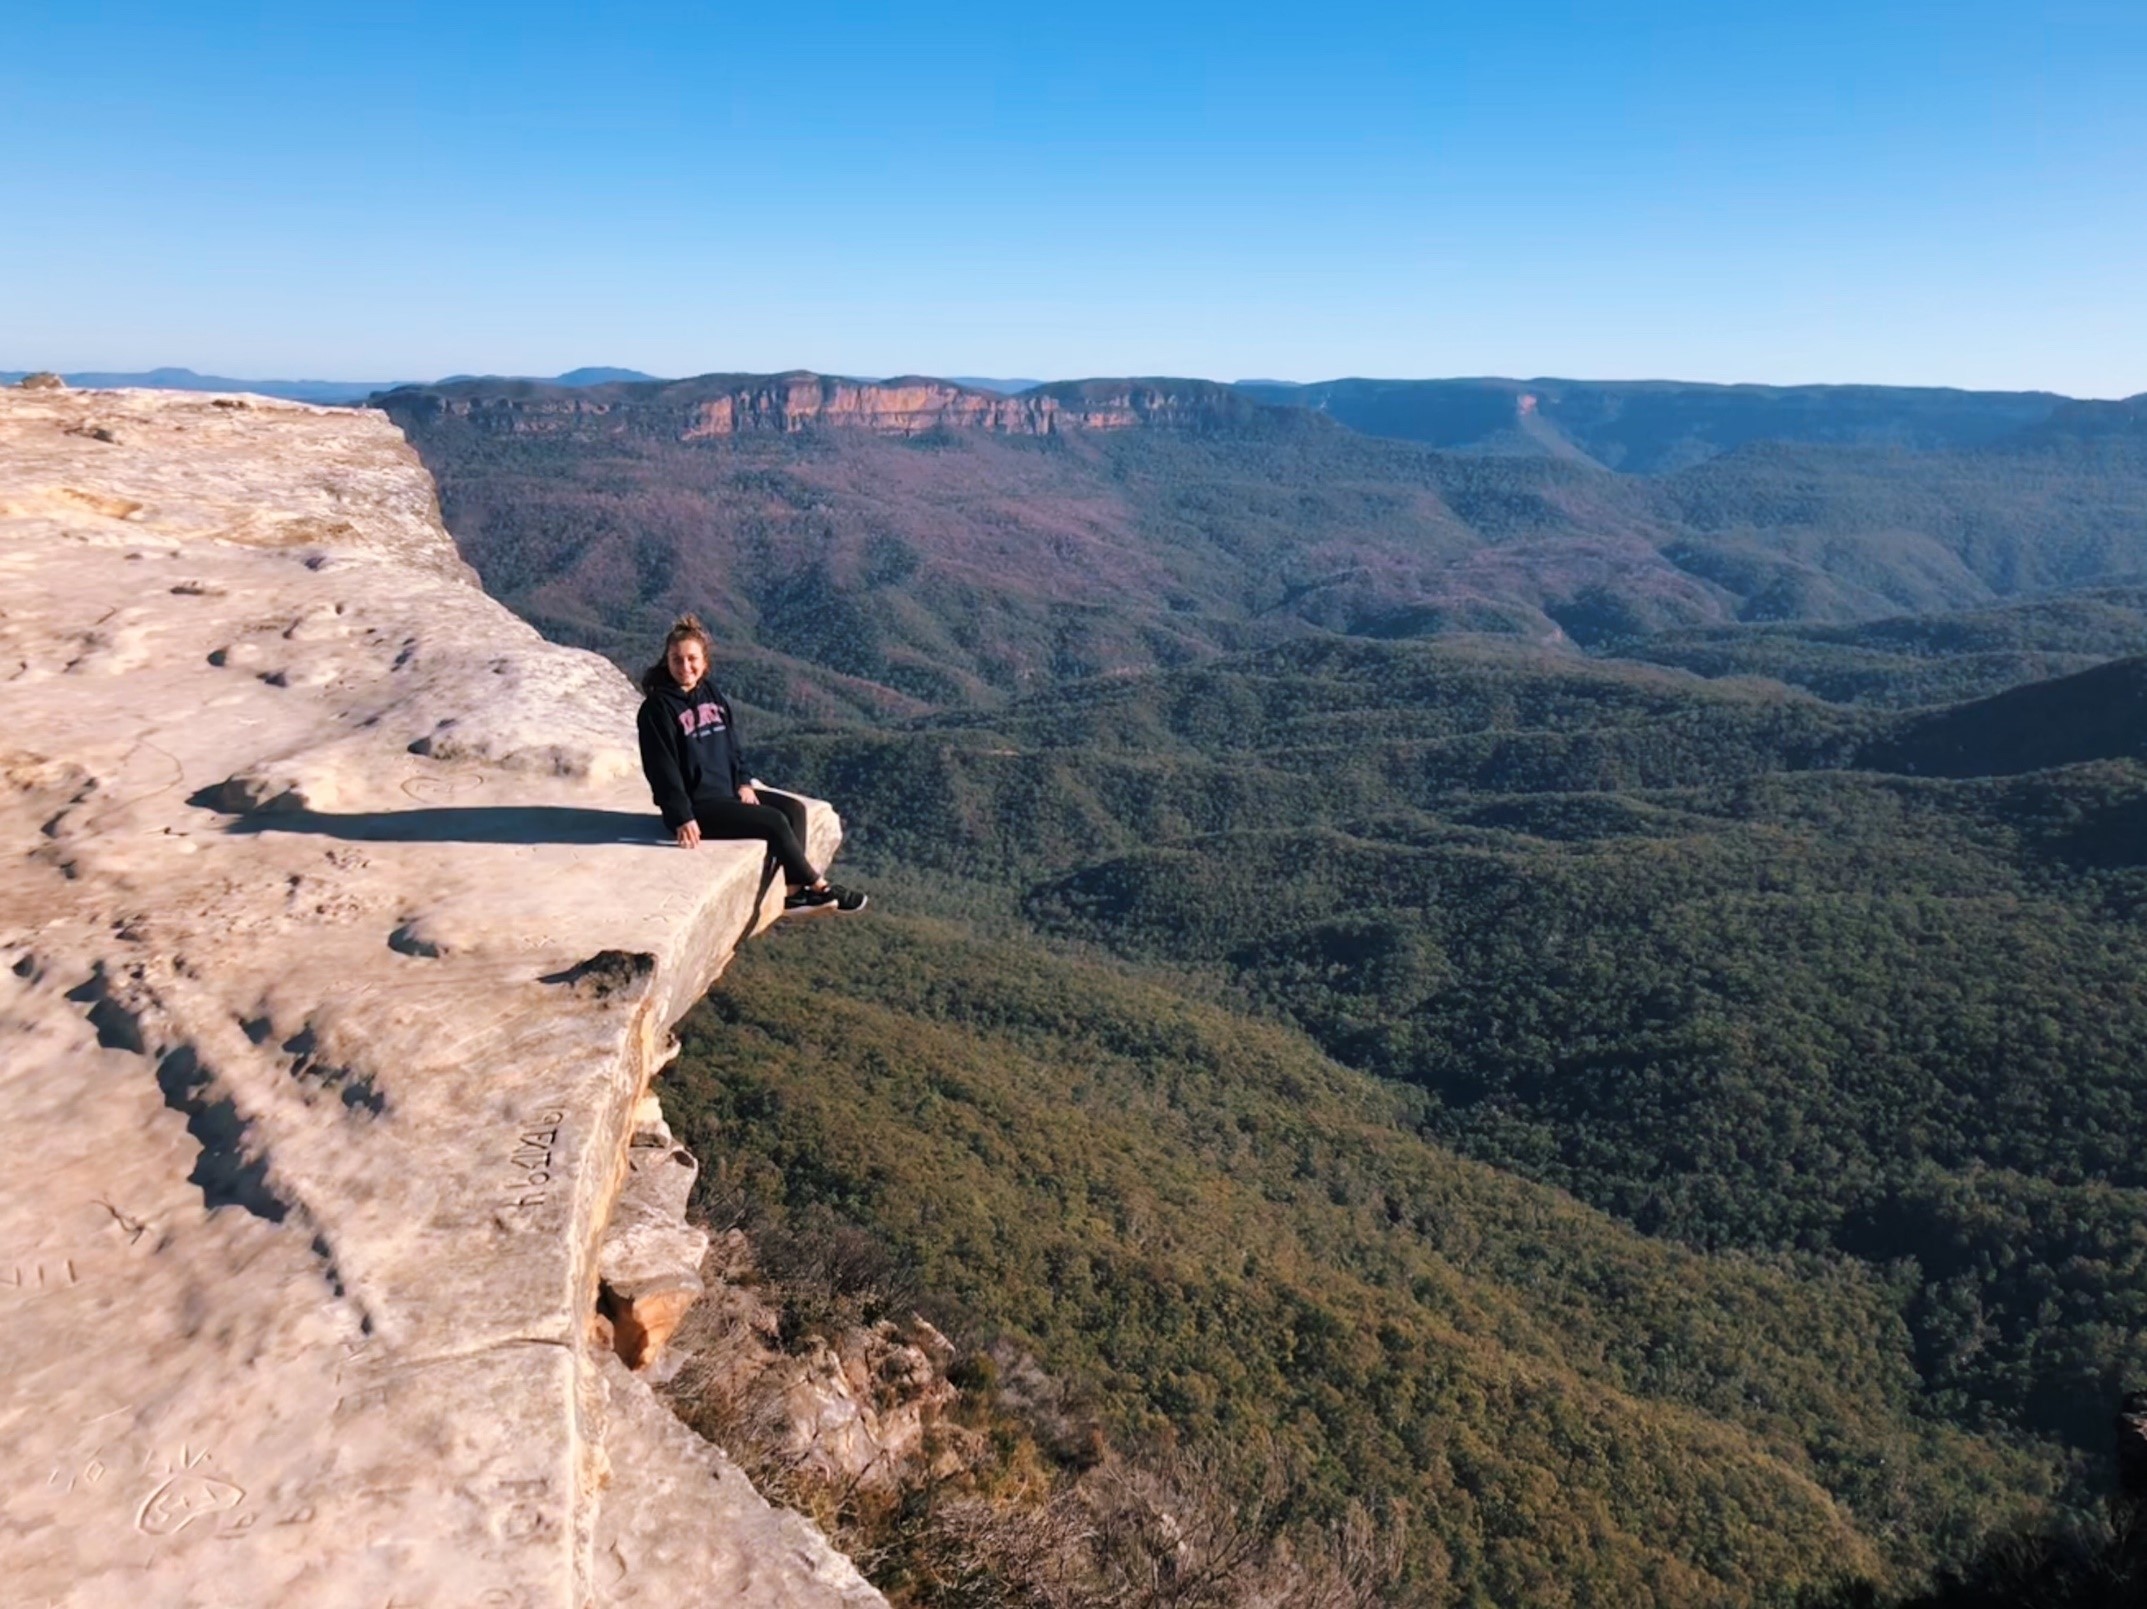 Price exploring Lincoln Rock at the Blue Mountains